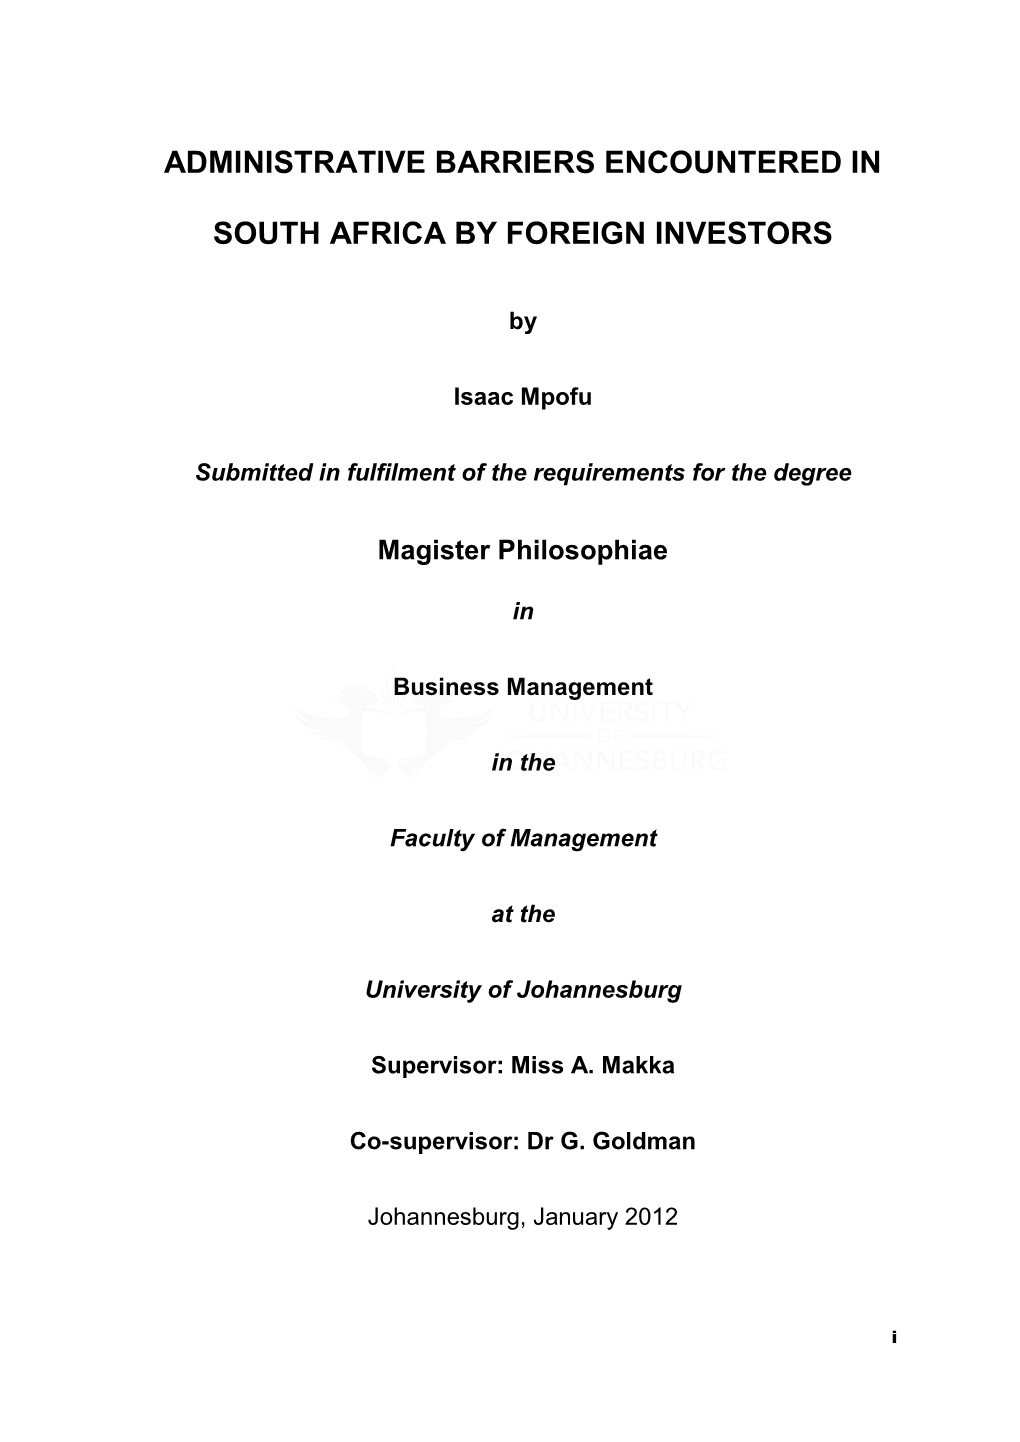 Administrative Barriers Encountered in South Africa by Foreign Investors